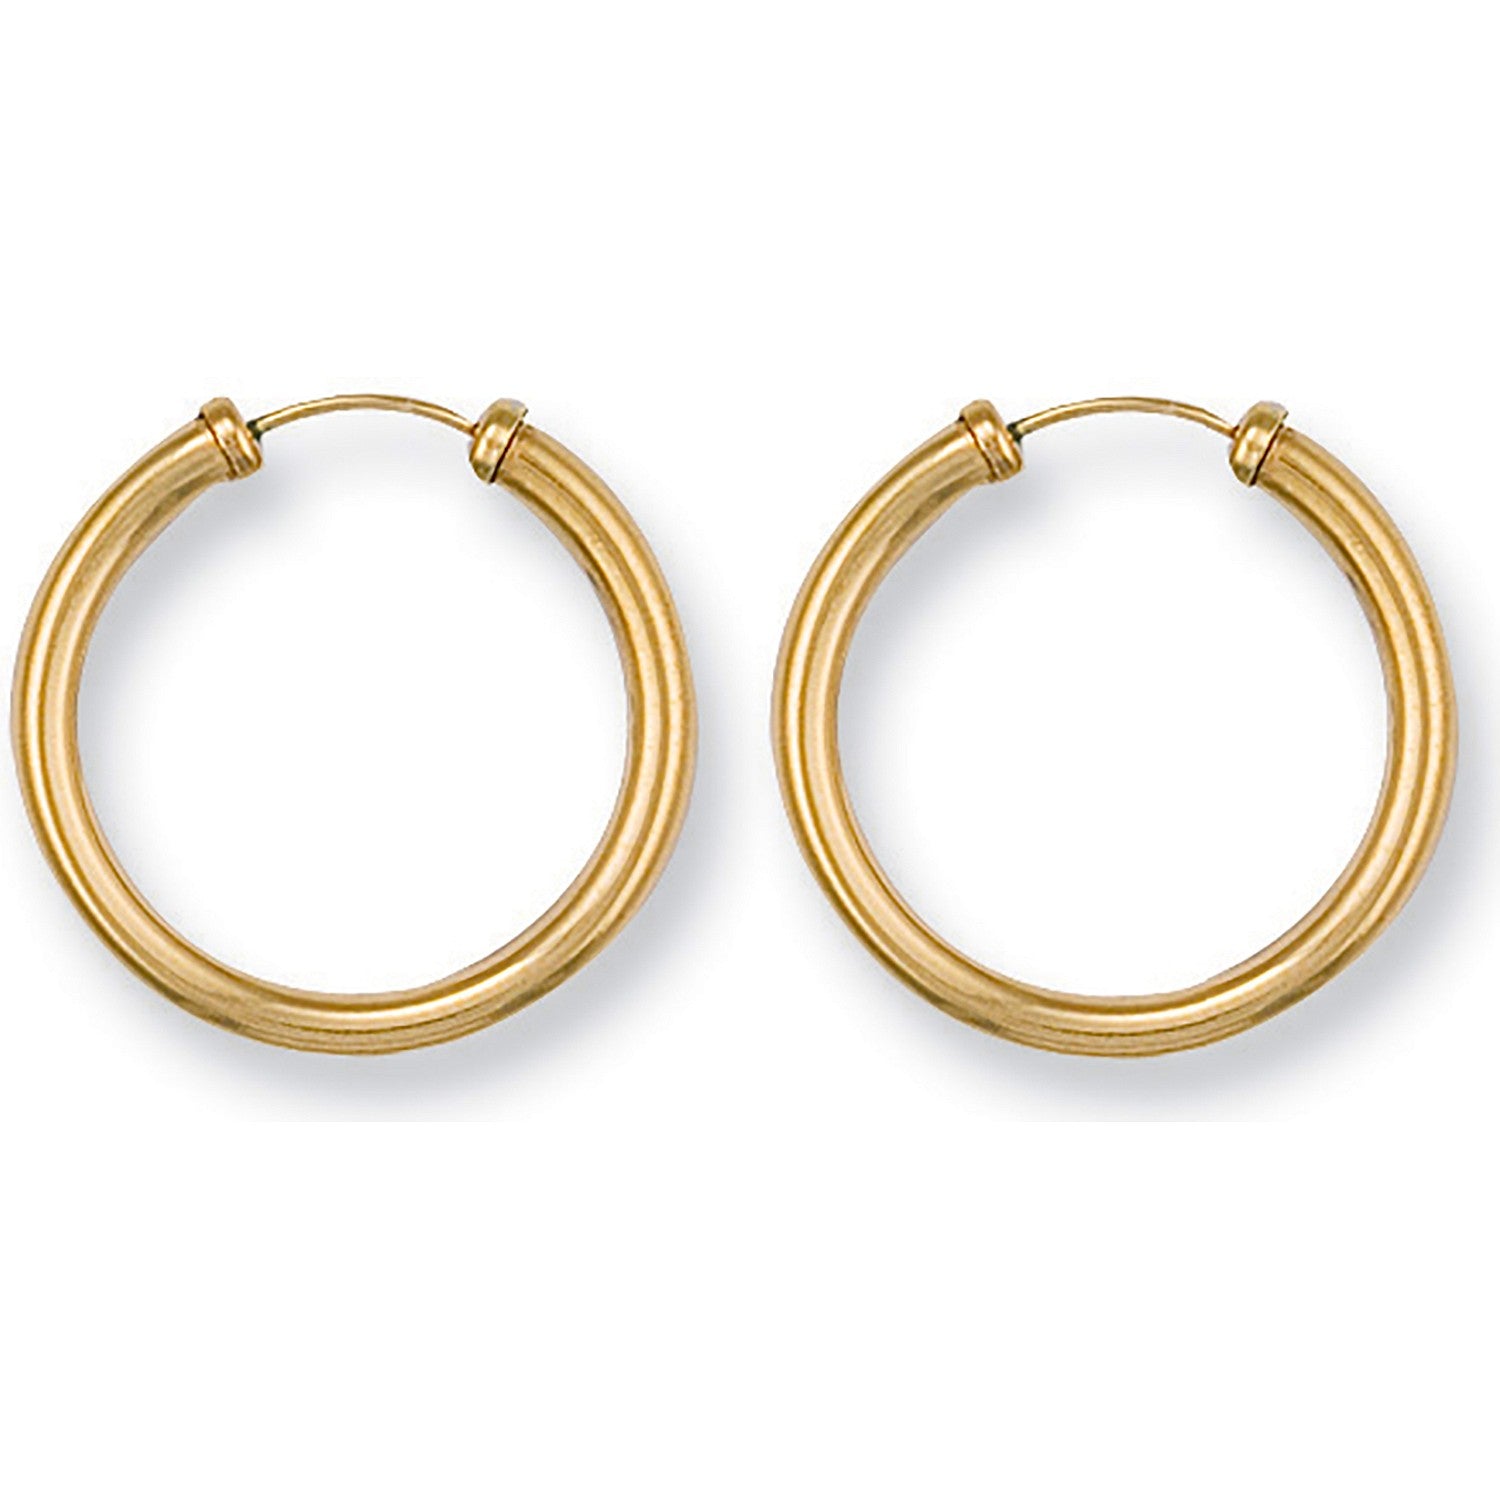 Yellow Gold 22.7mm Caped Sleepers